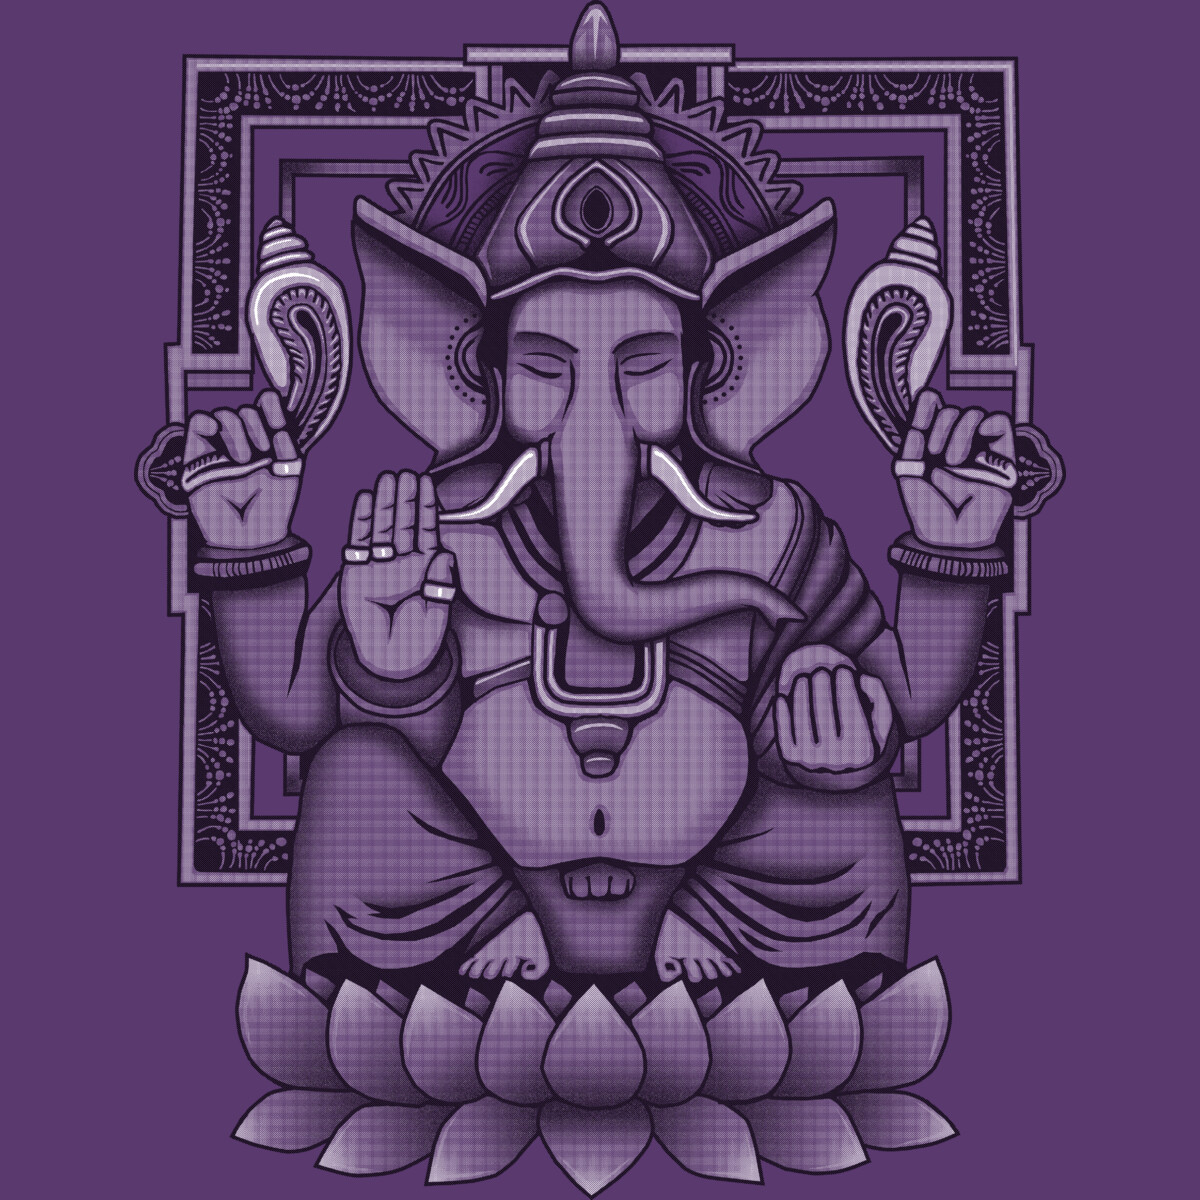 Lord Ganesh Halftone 2 Mens Purple Graphic Tee - Design By Humans  3XL - image 2 of 3